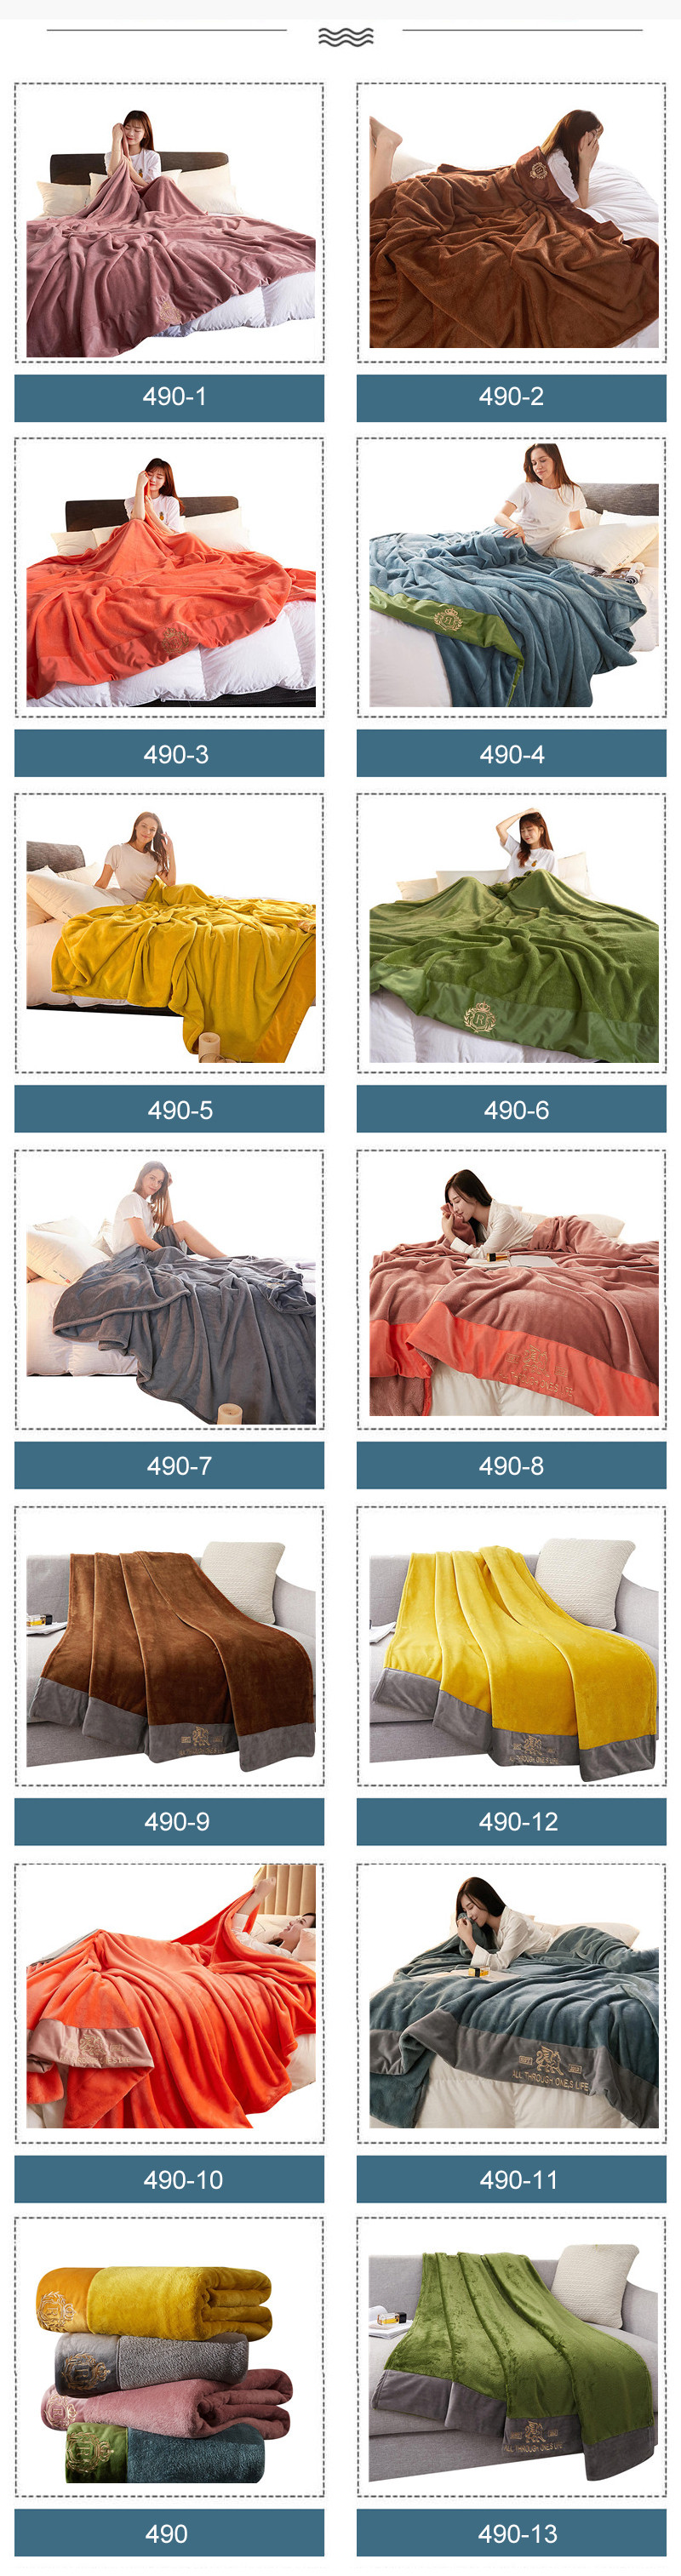 Soft Blankets With GOLO